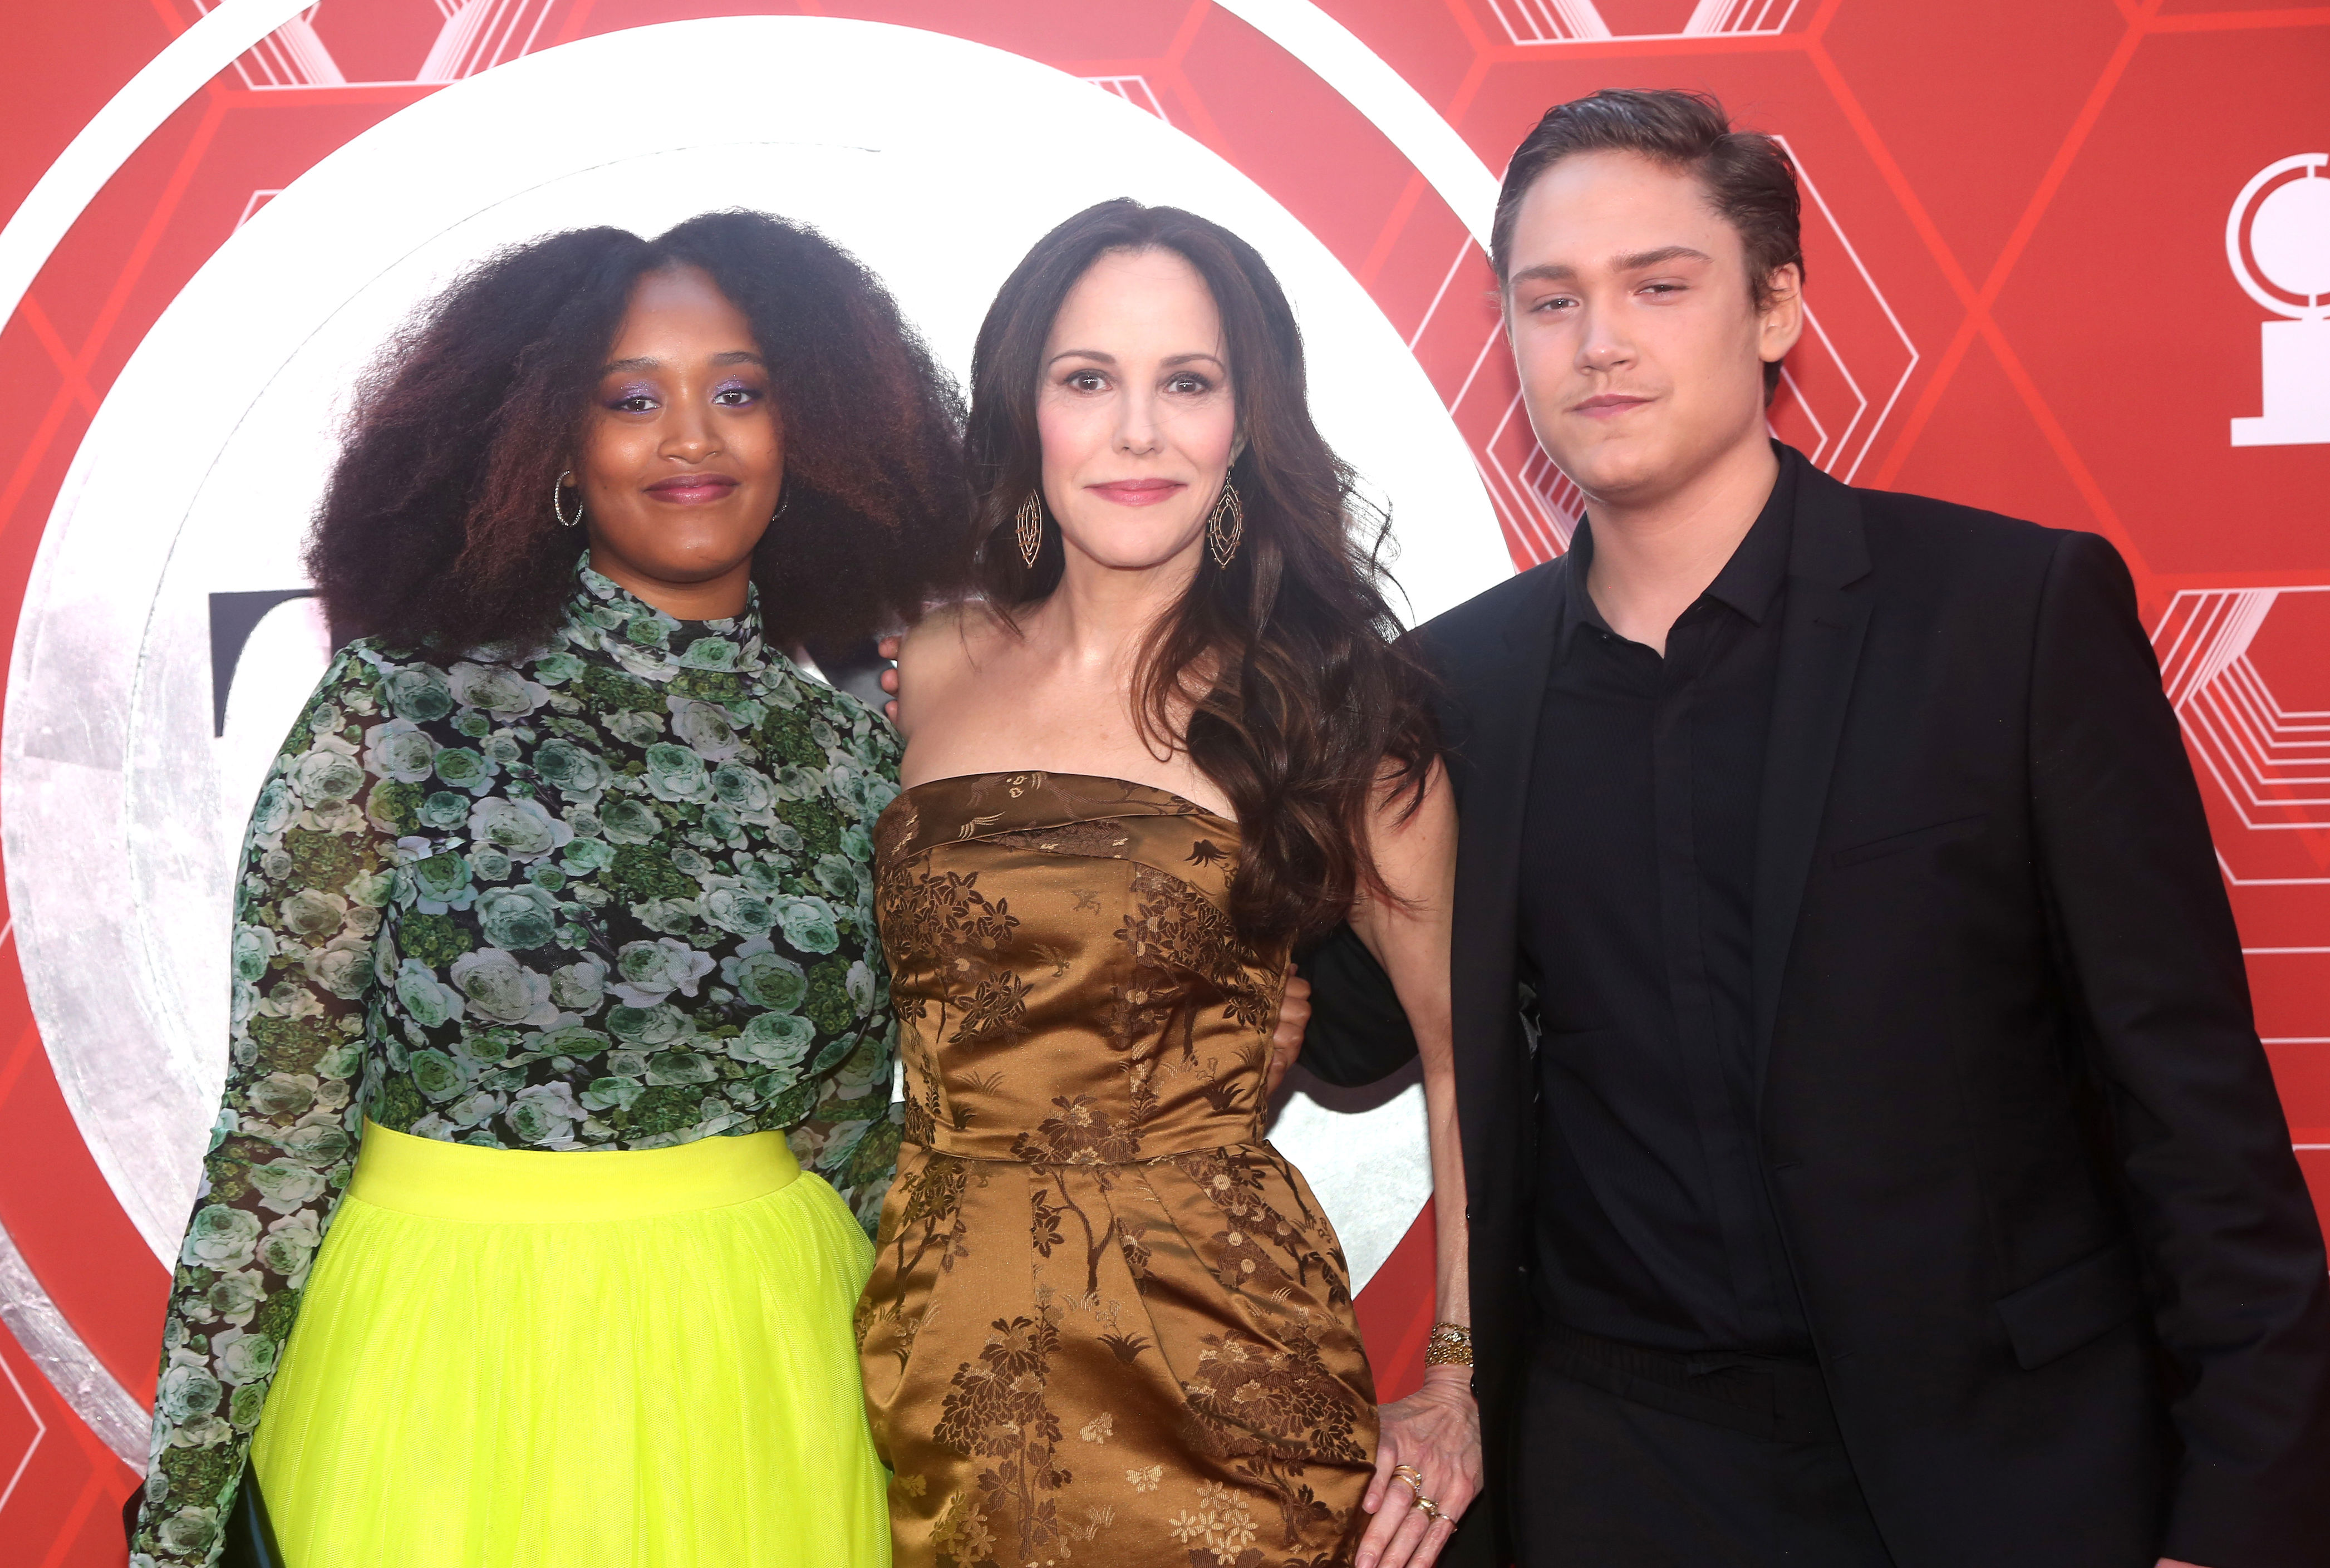 <p>Mary-Louise Parker brought her children -- Caroline Aberash Parker (who joined her family in 2007) and William Atticus Parker (who was born in 2004) to the <a href="https://www.wonderwall.com/awards-events/stars-on-the-2021-tony-awards-red-carpet-502398.gallery">74th Annual Tony Awards</a> at the Winter Garden Theater in New York City on Sept. 26, 2021. The teens got to watch their mom win a Tony for best actress in a play that night.</p>